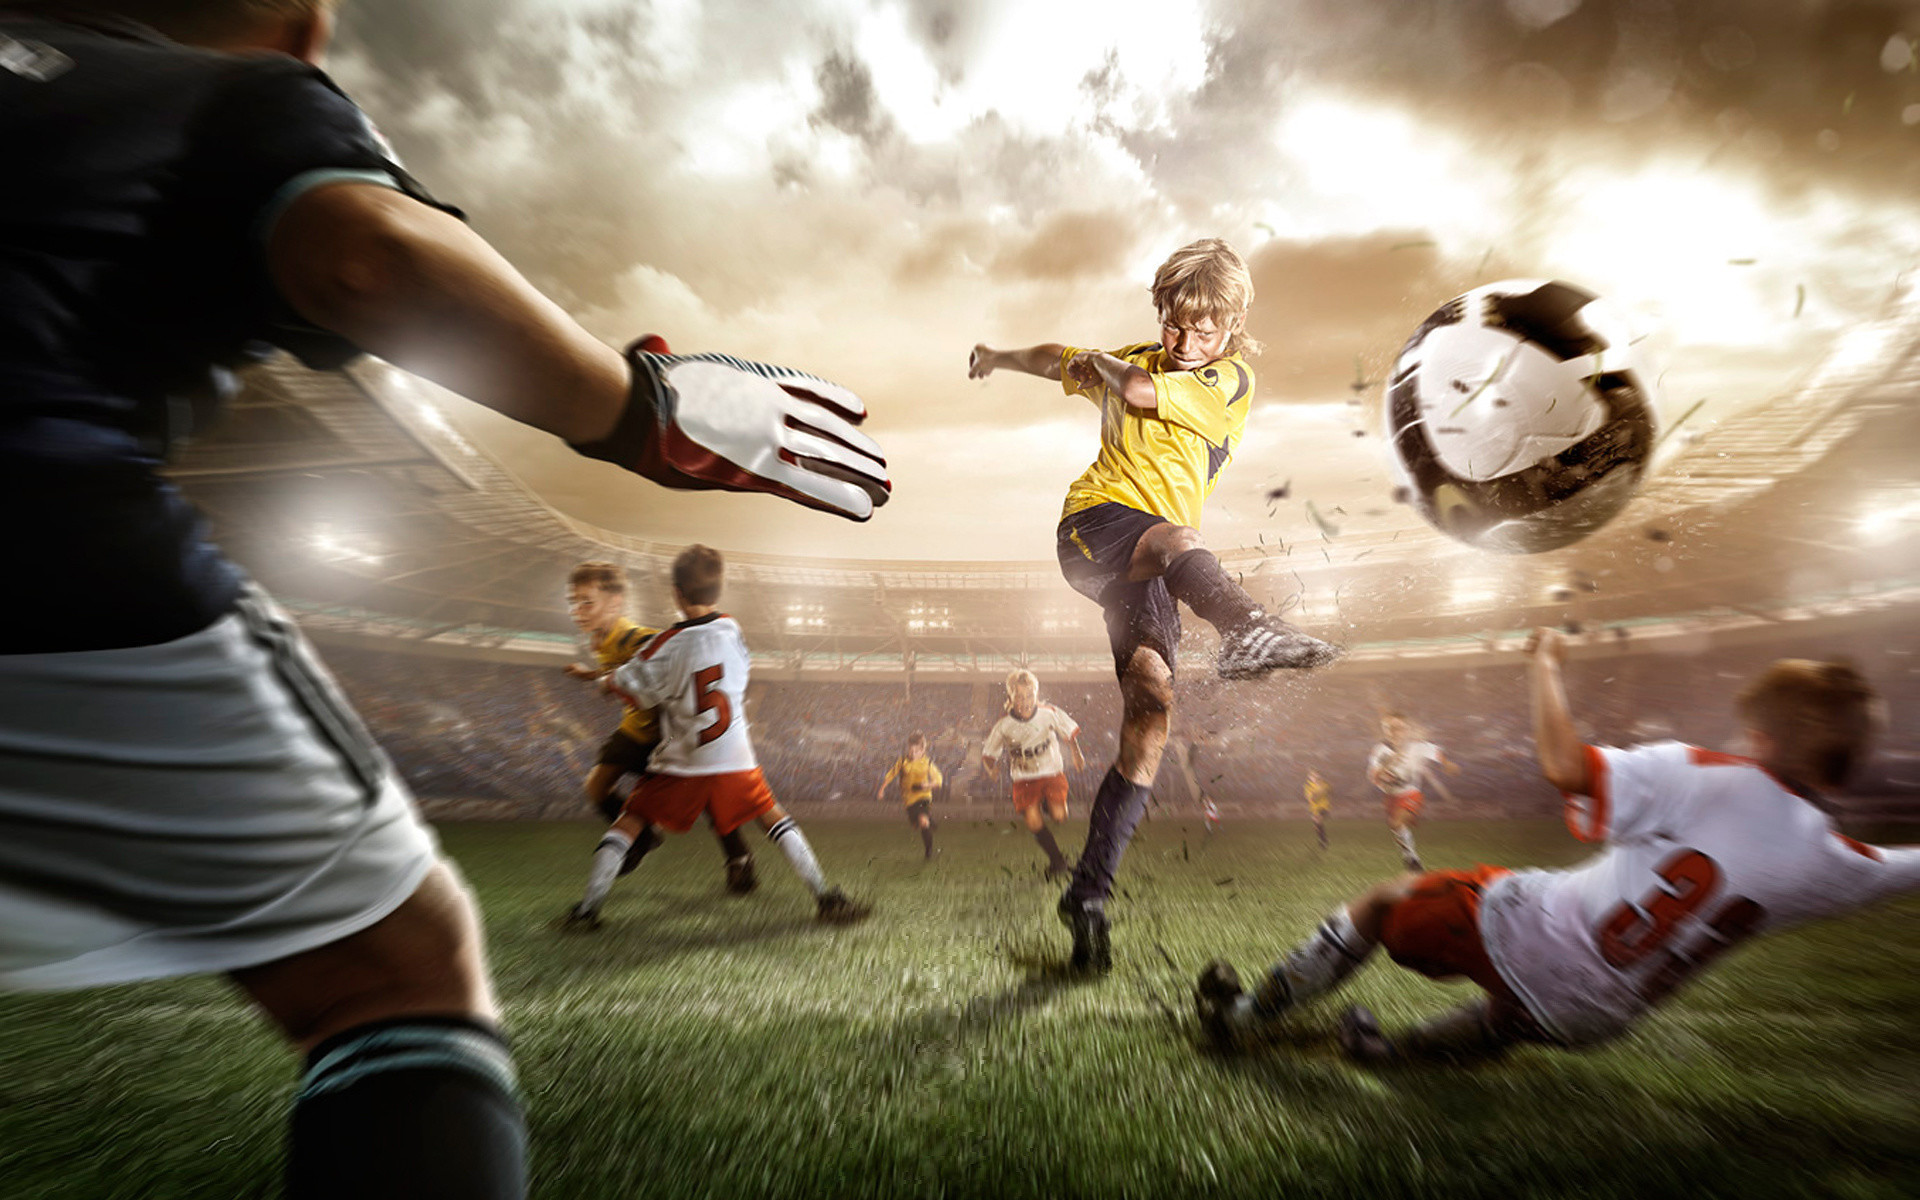 Awesome Soccer Background Image